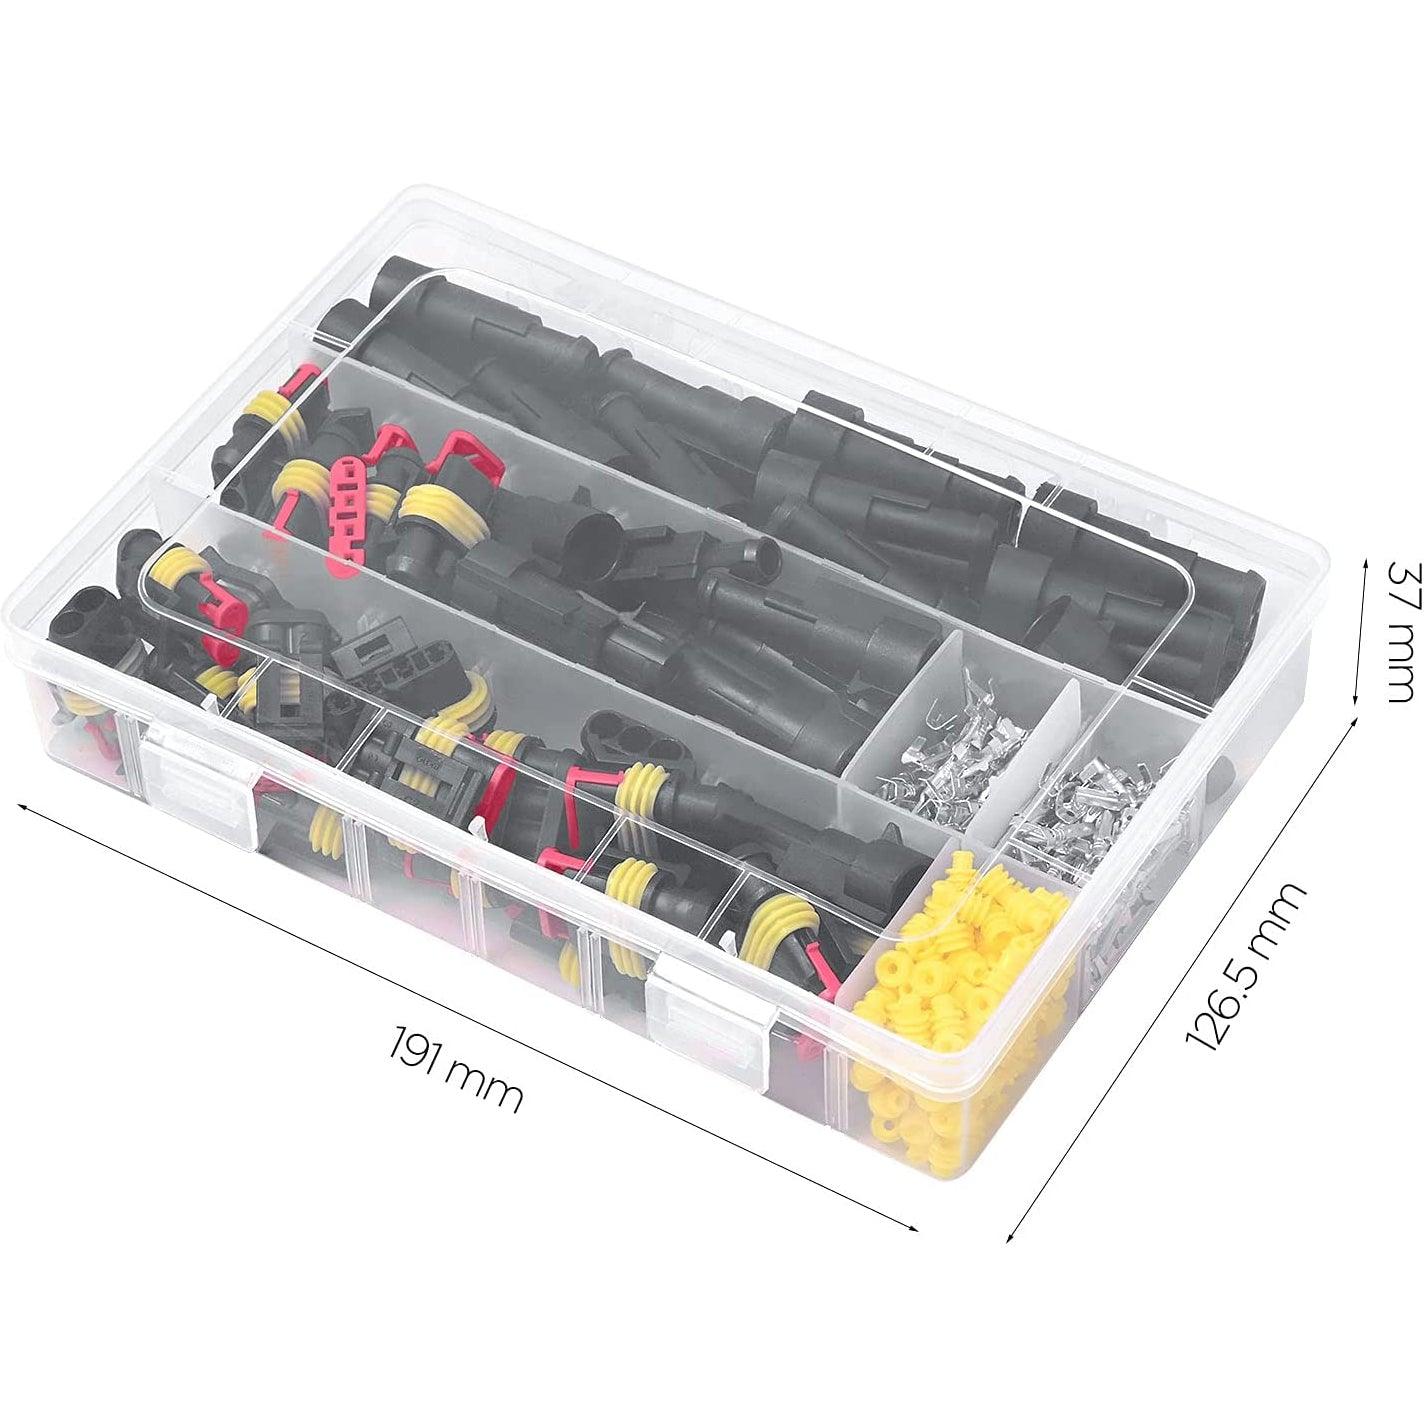 352Pieces Waterproof Wire Connectors Terminals - Automotive Motorcycle Car Truck Boat Electrical Connectors Plug Kit, 1 2 3 4 Pin Harness - KinglyDay